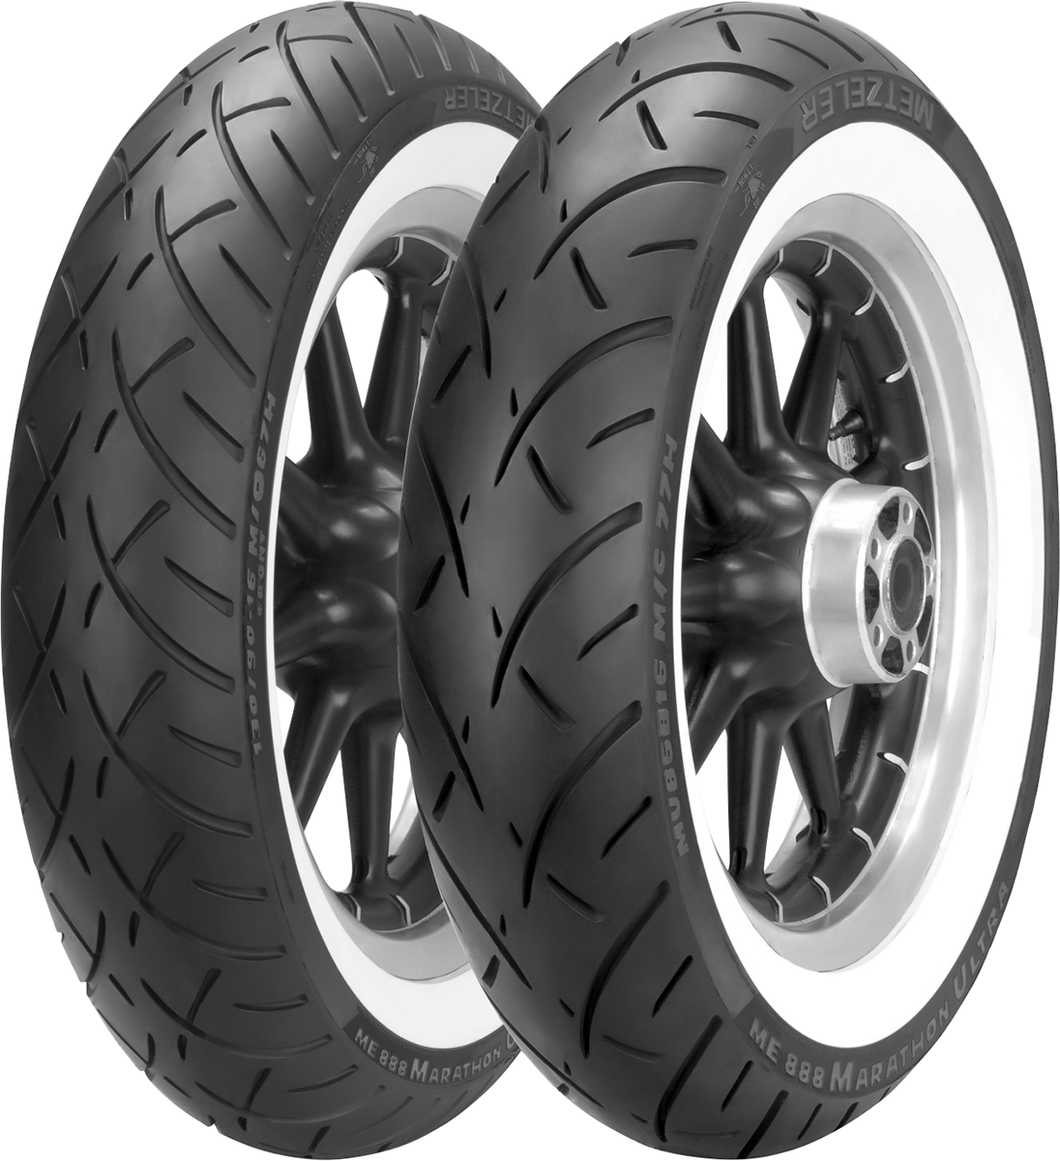 Tire - ME 888 - 180/65B16 - Wide Whitewall